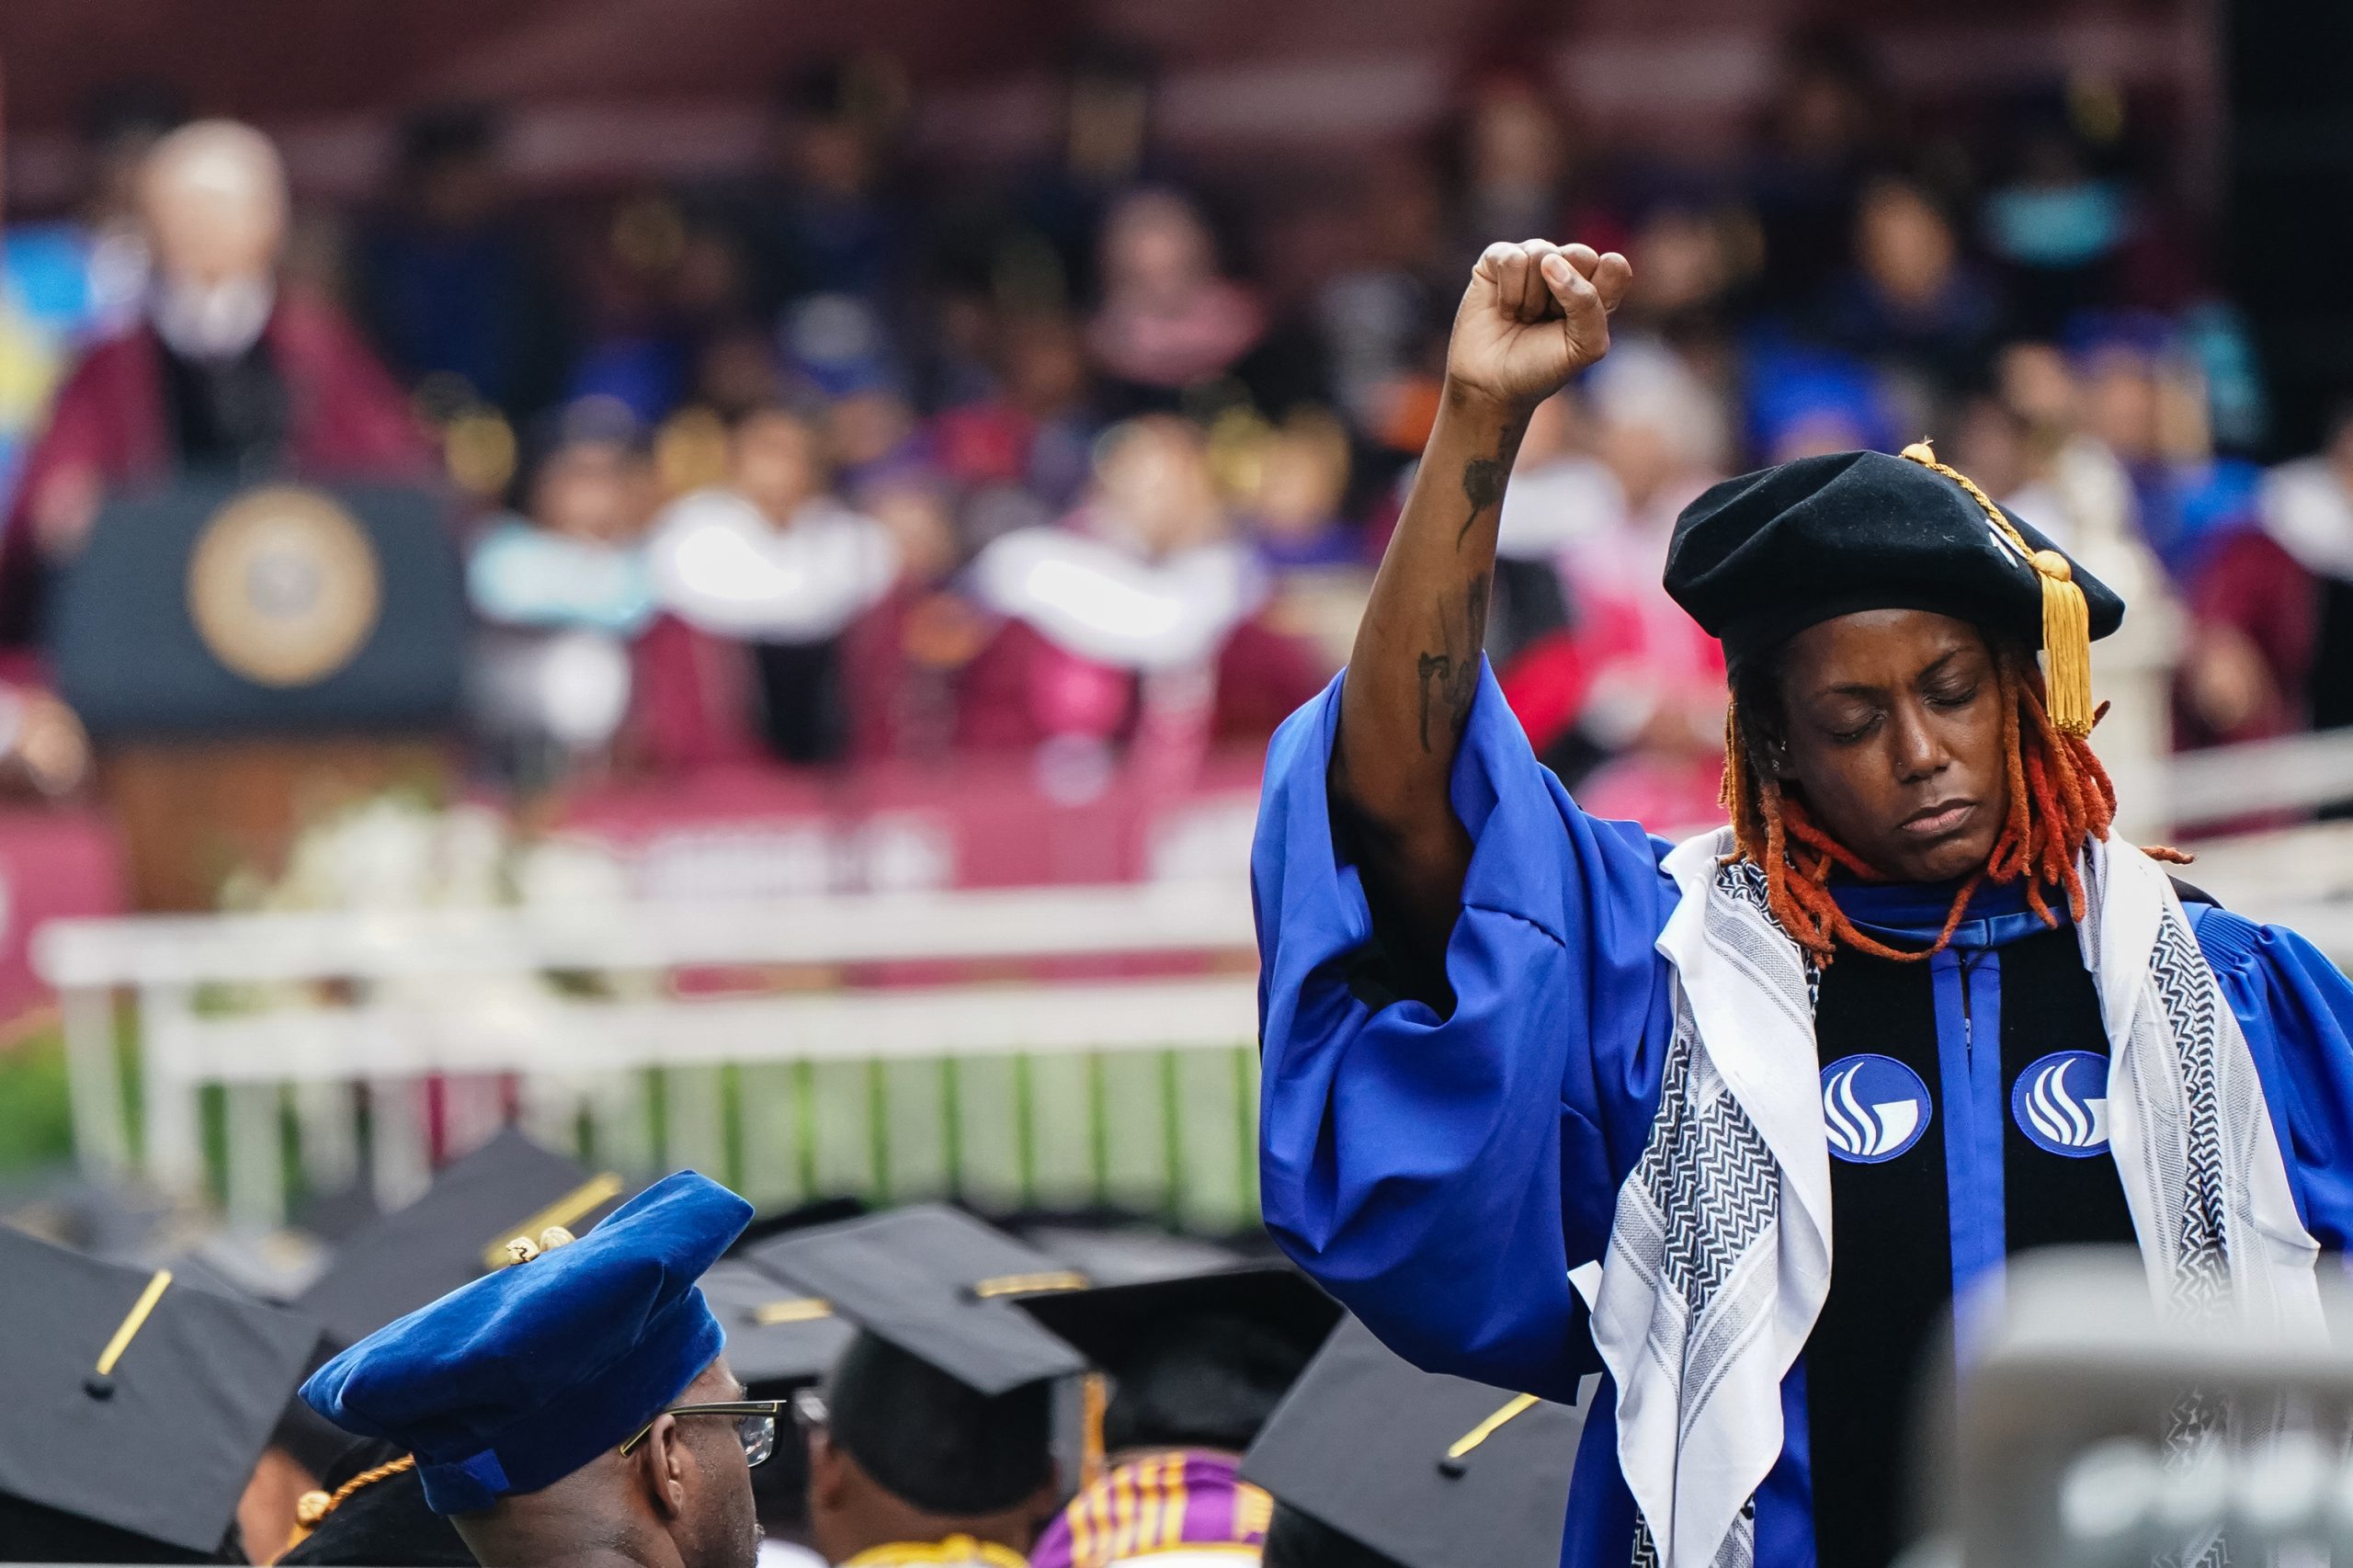 Riot Pens: Are HBCUs Putting Legacy Before Progress?